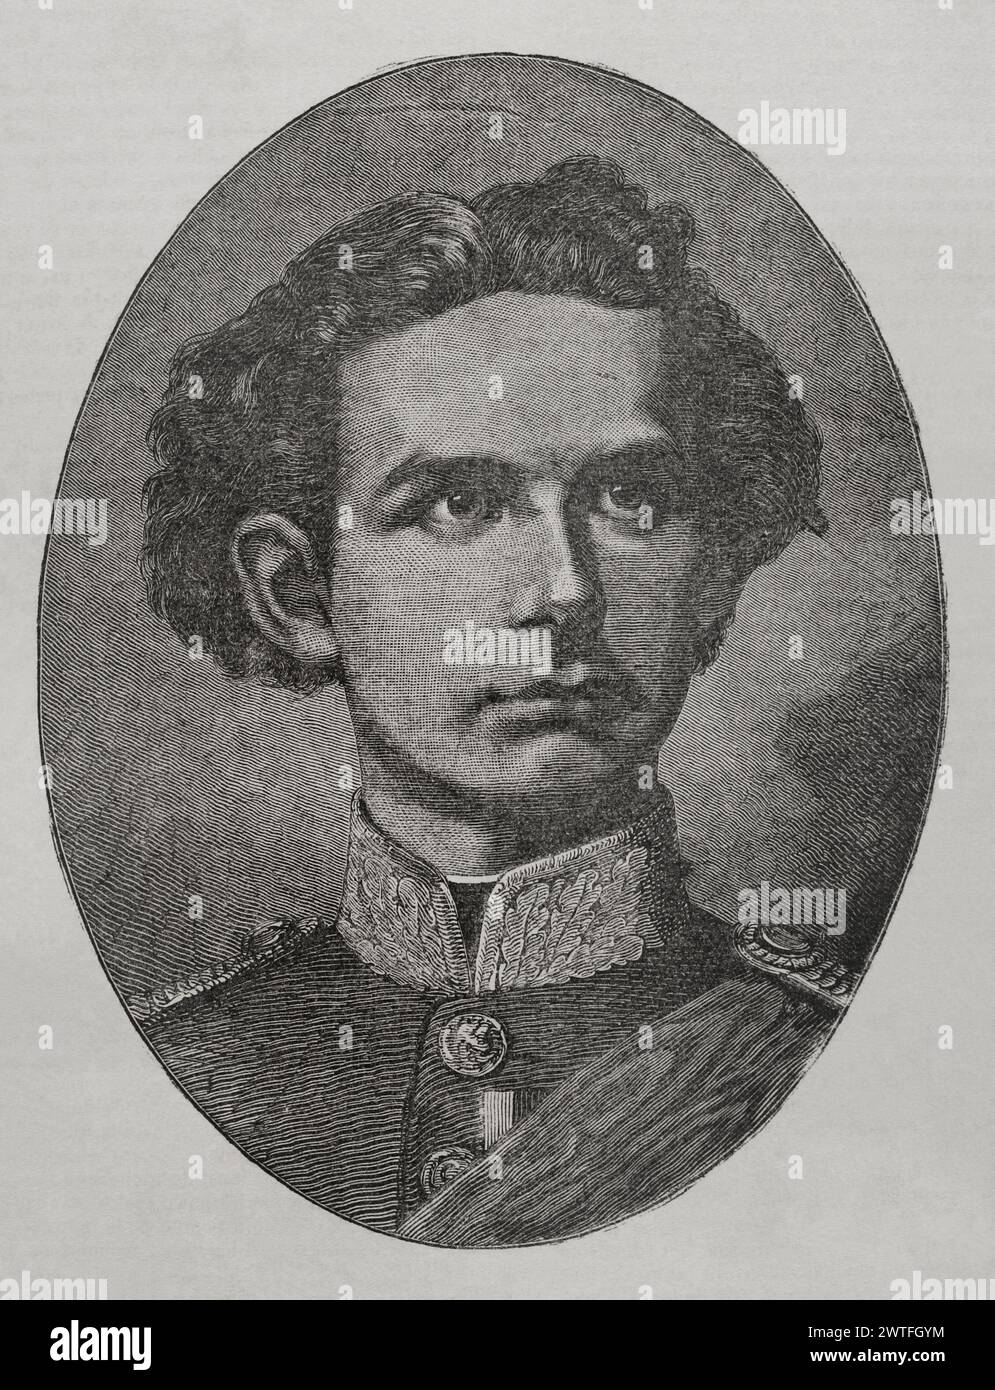 Ludwig II of Bavaria (1845-1886). King of Bavaria (1864-1886). Portrait. Engraving. 'Historia de la Guerra de Francia y Prusia' (History of the War between France and Prussia). Volume II. Published in Barcelona, 1871. Stock Photo